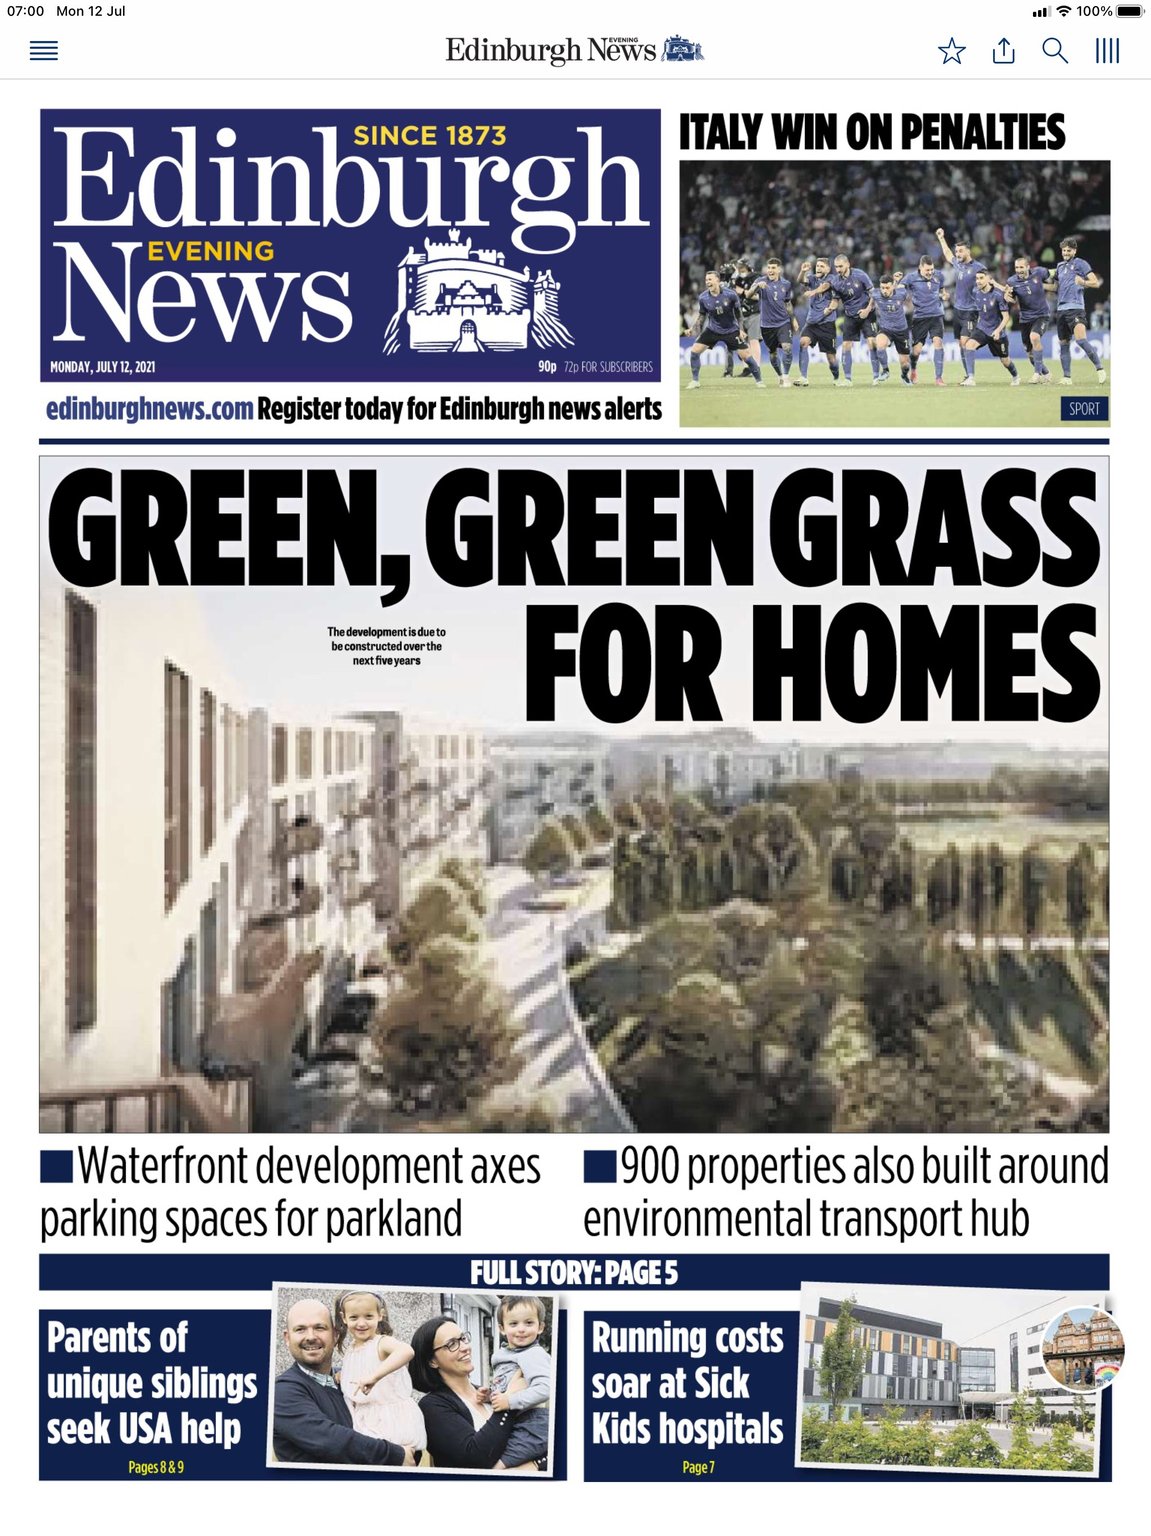 Image from the front page of the Edinburgh Evening News